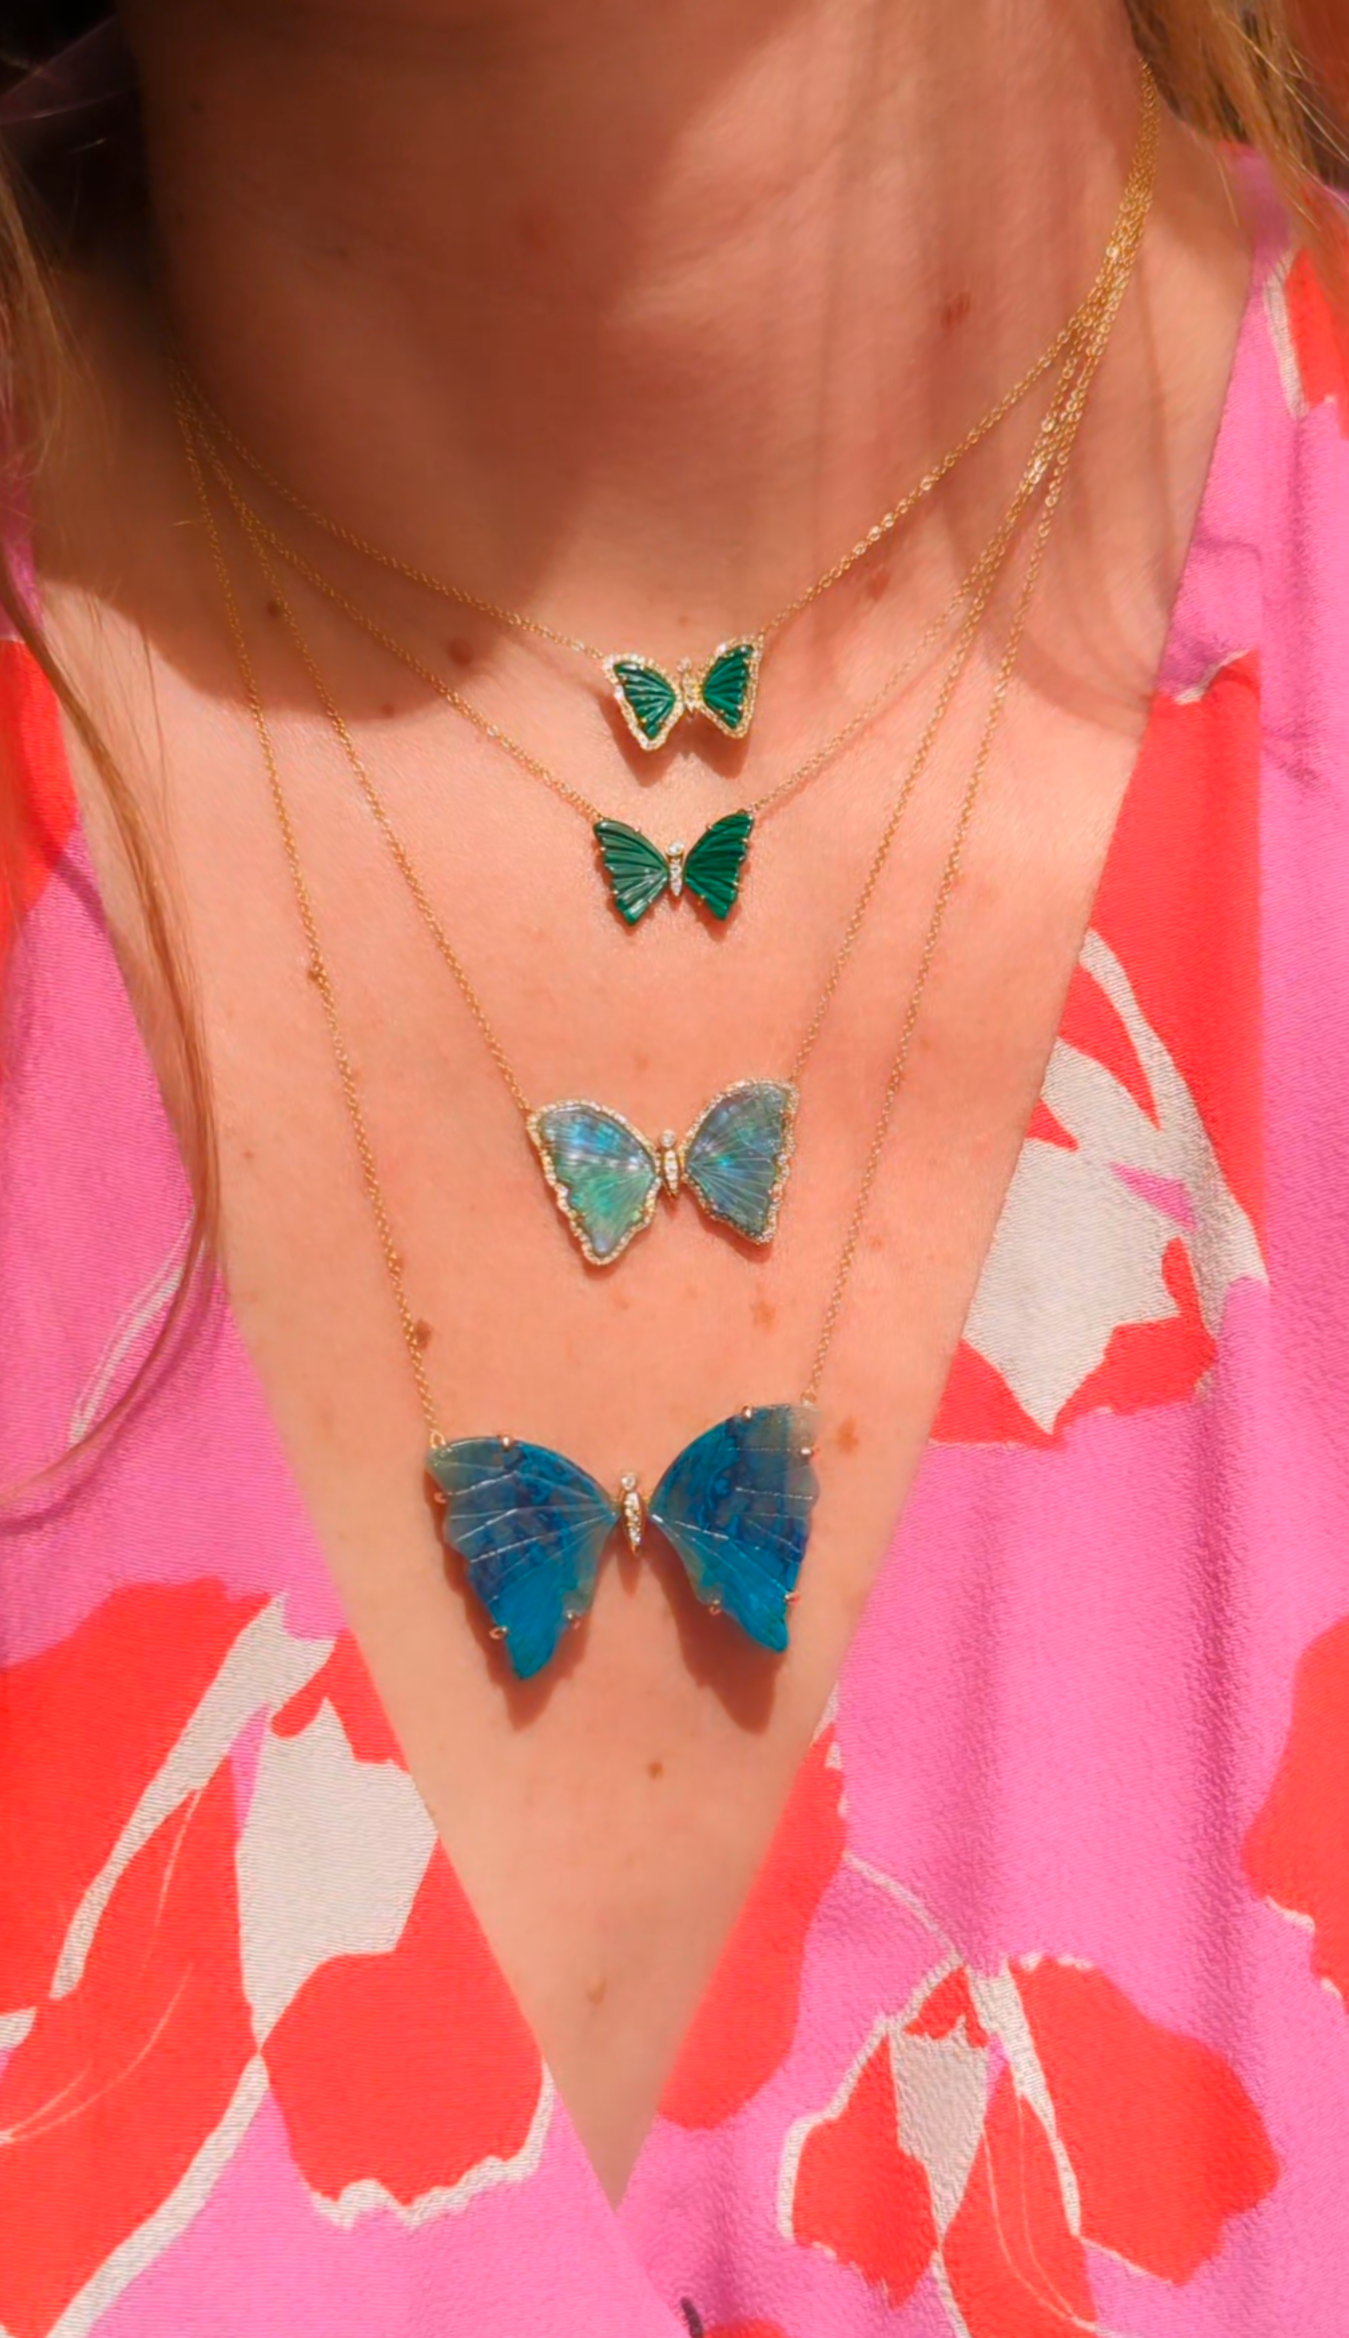 Large Chrysocolla Butterfly Necklace with Prongs